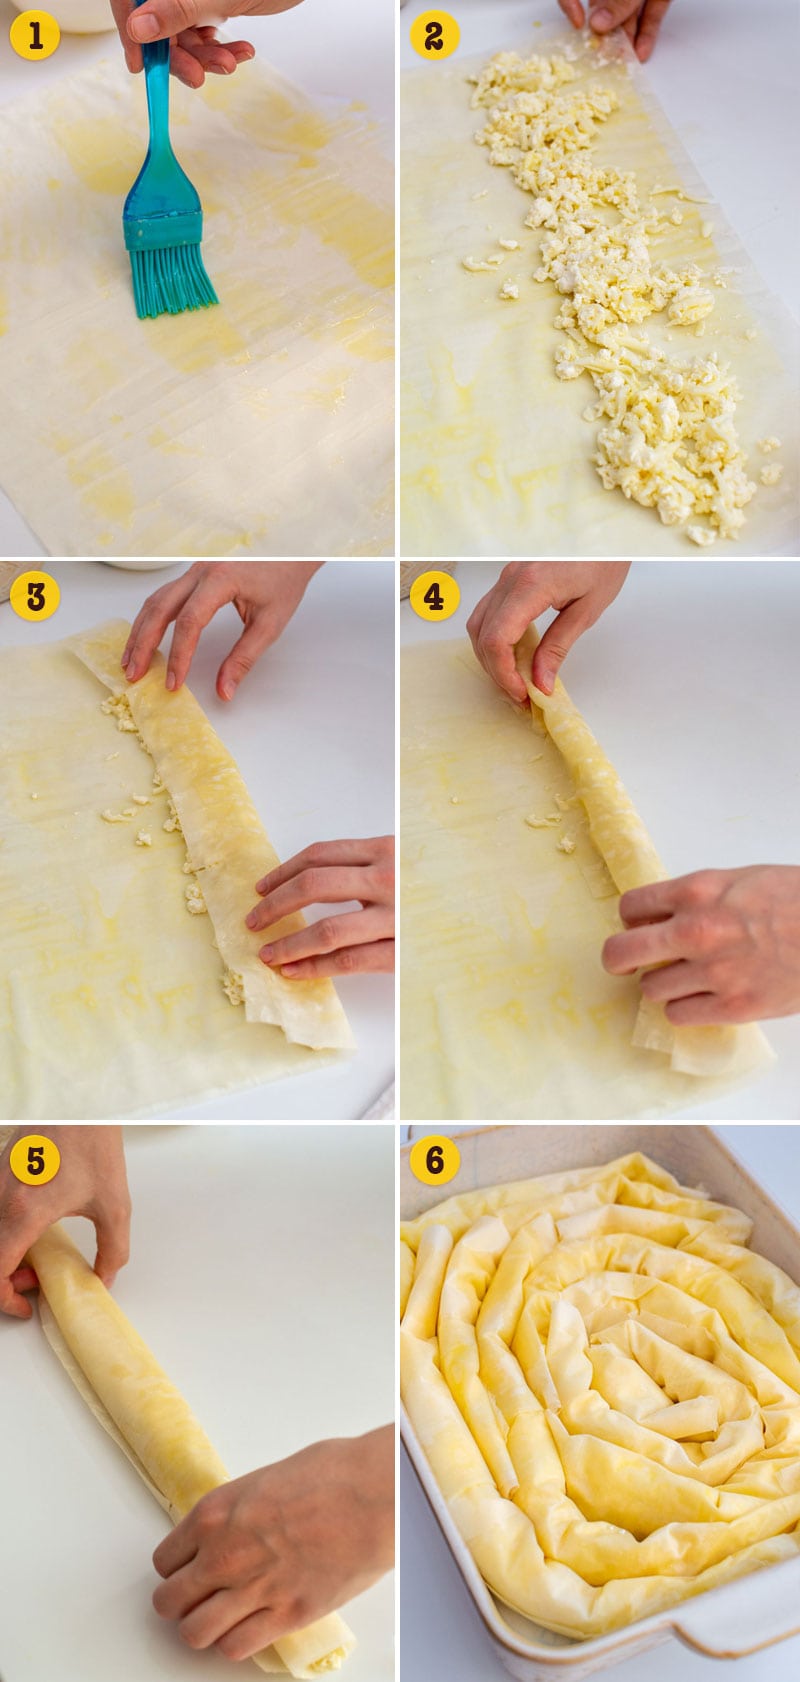 Step by step guide how to roll phyllo dough for a bosnian cheese pita sirnica.